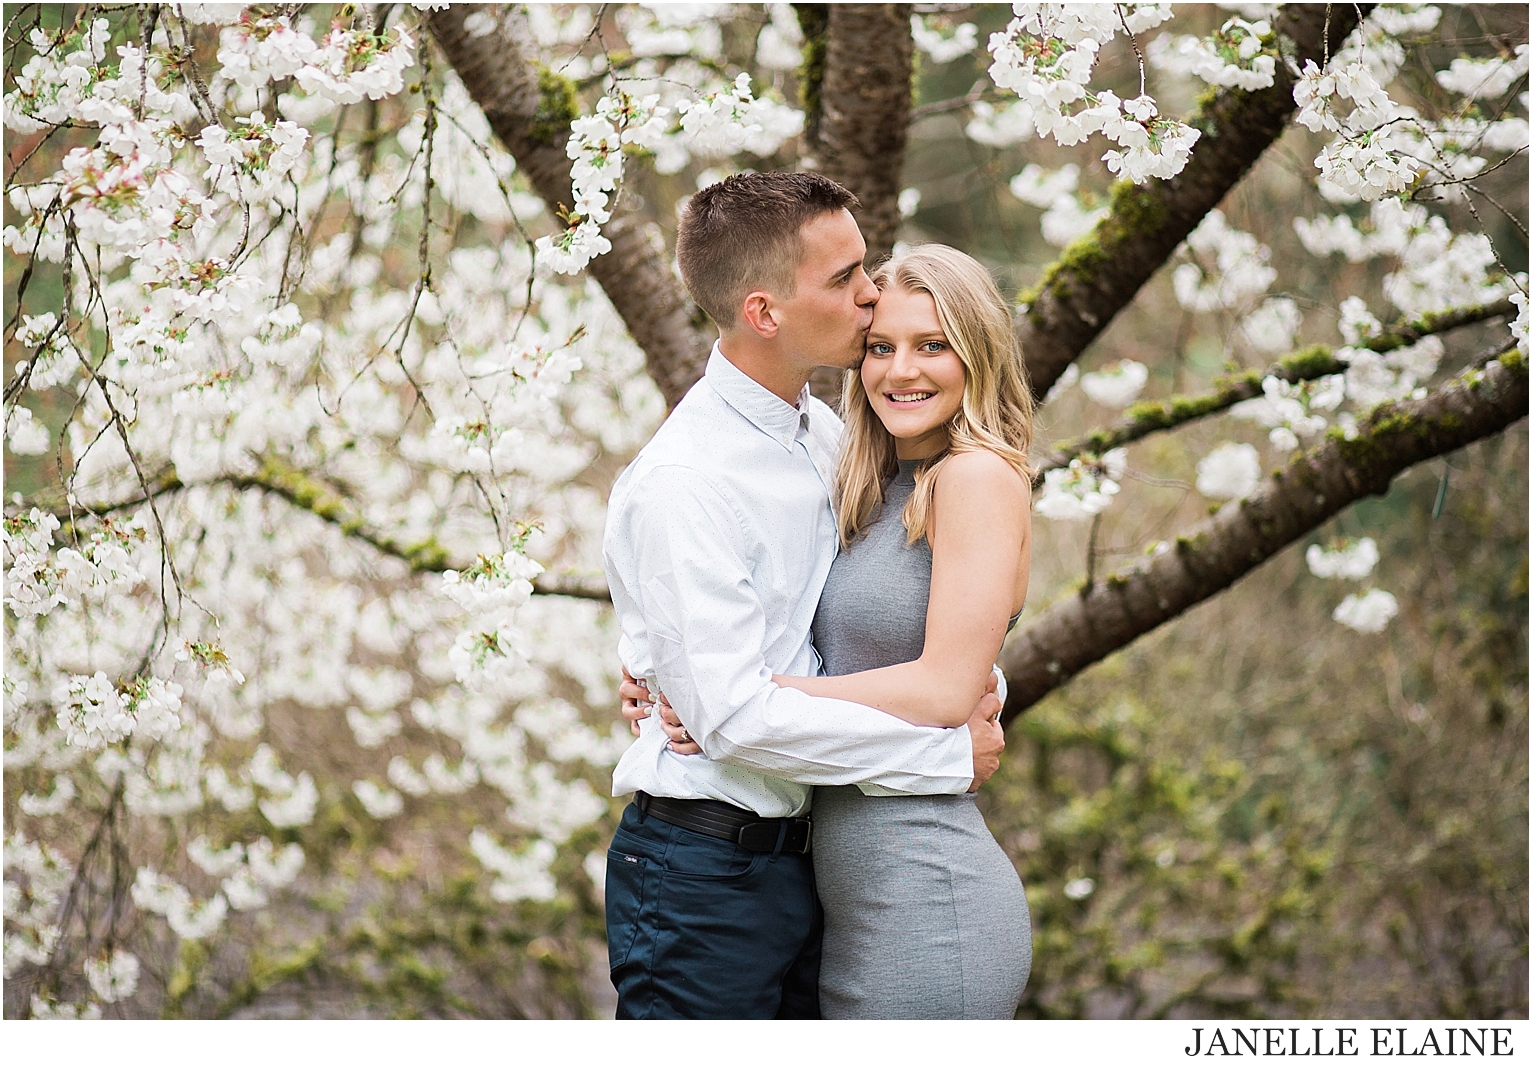 tricia and nate engagement photos-janelle elaine photography-13.jpg